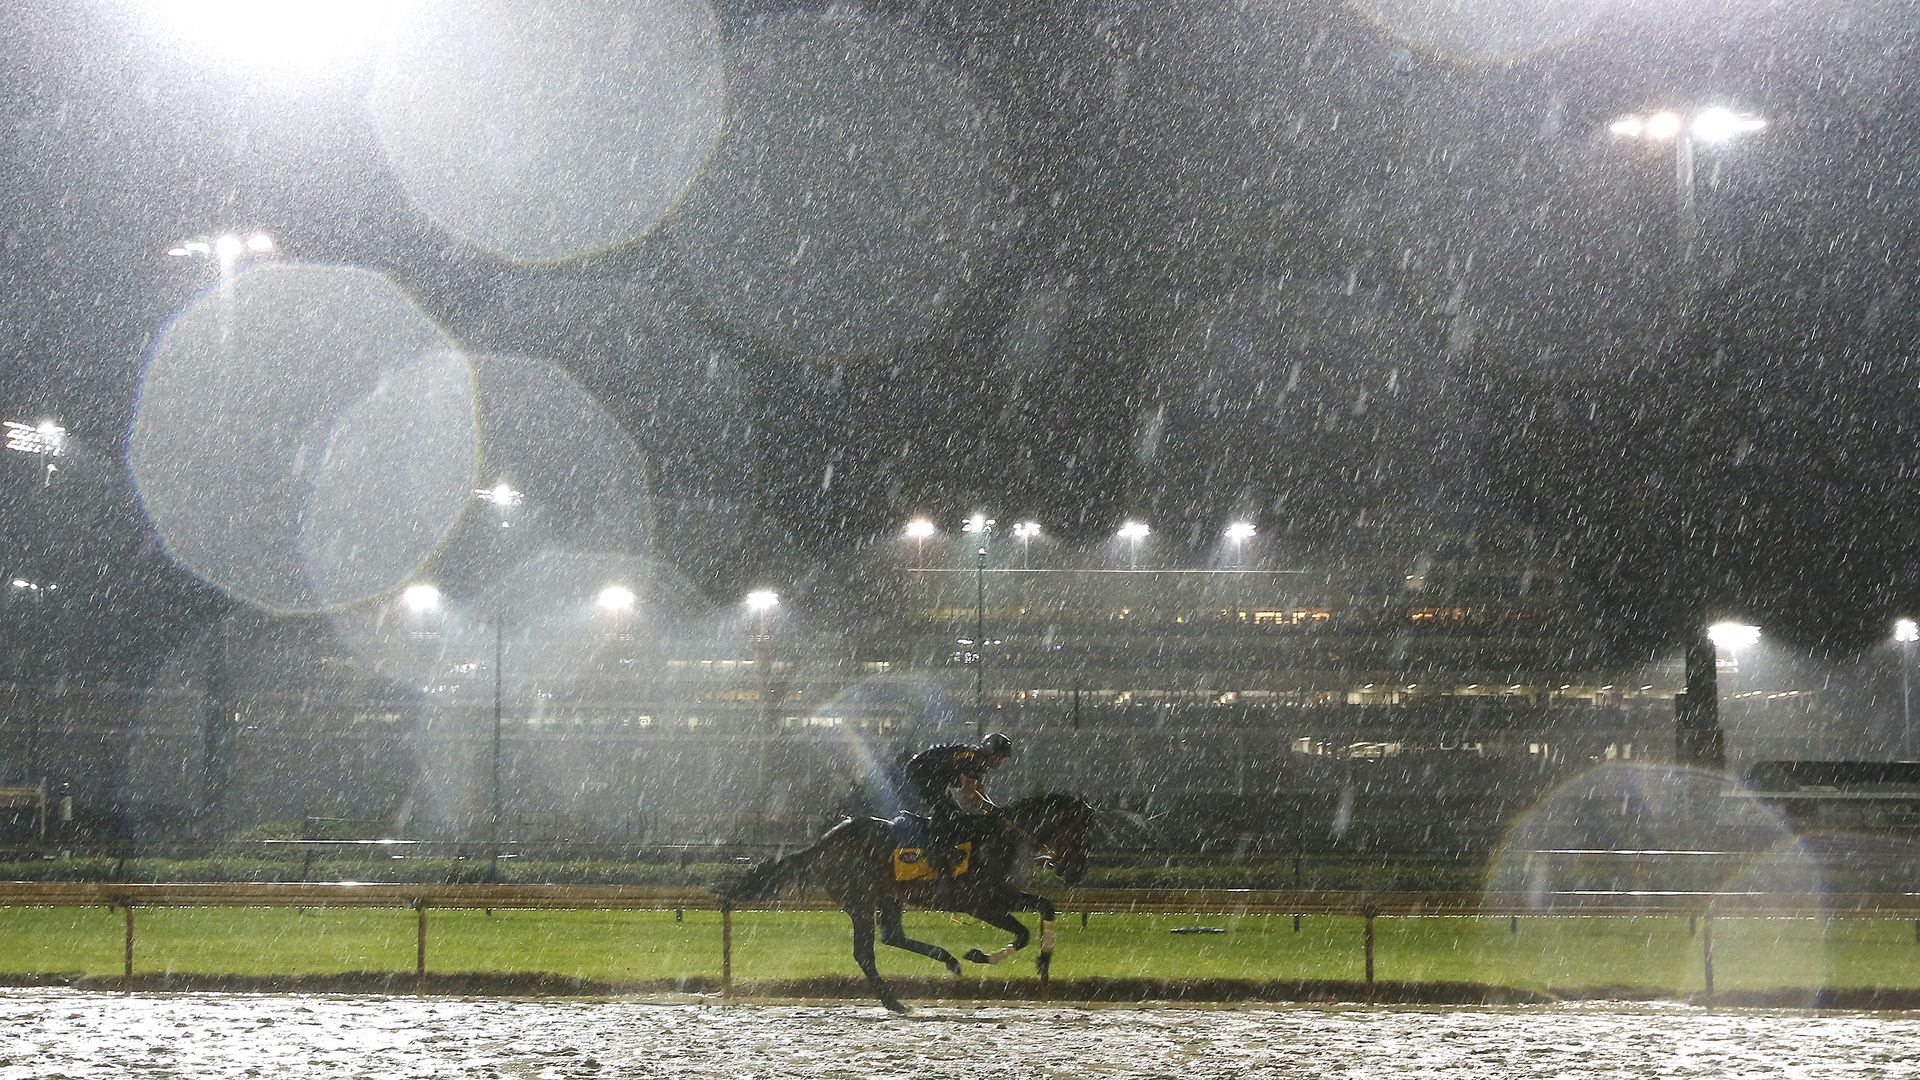 In this image, a racer rides a horse on an empty race track in the rain at night.